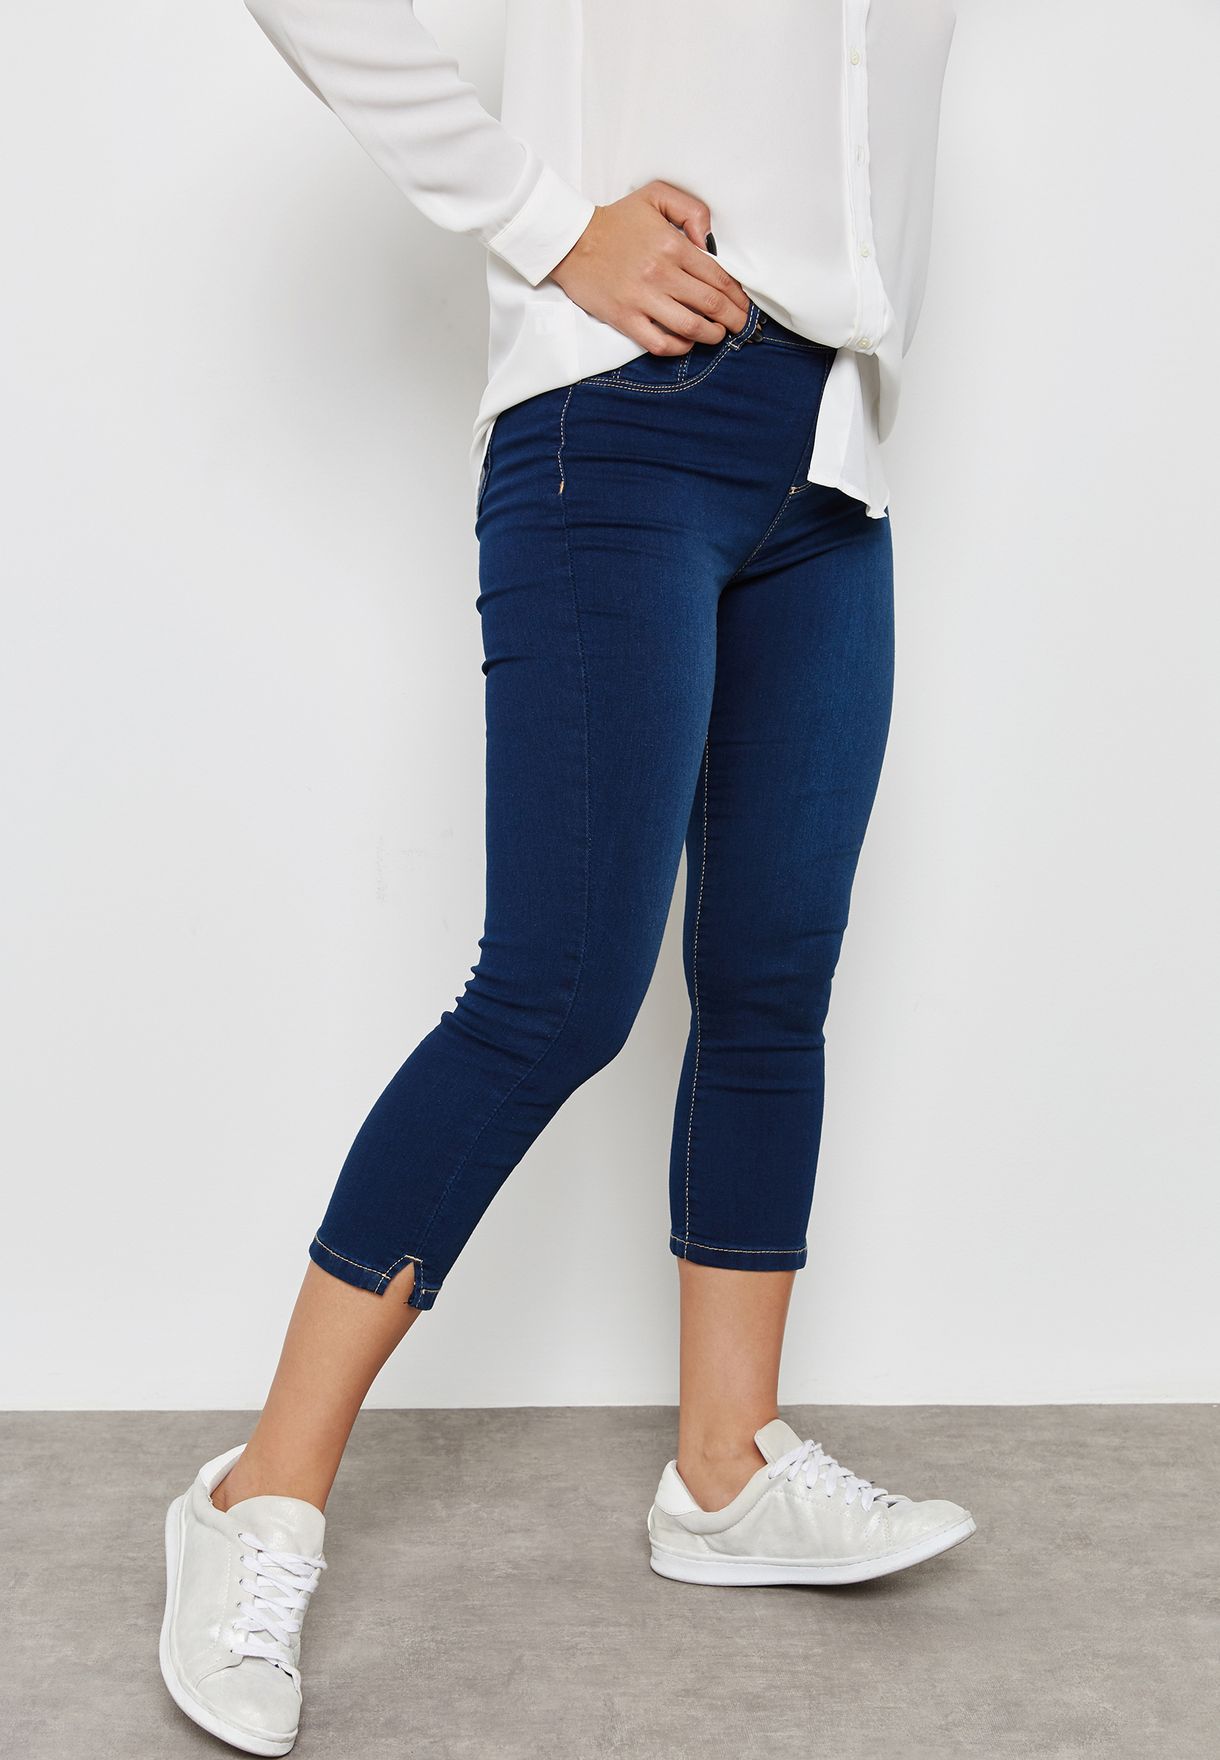 cropped jeggings dorothy perkins